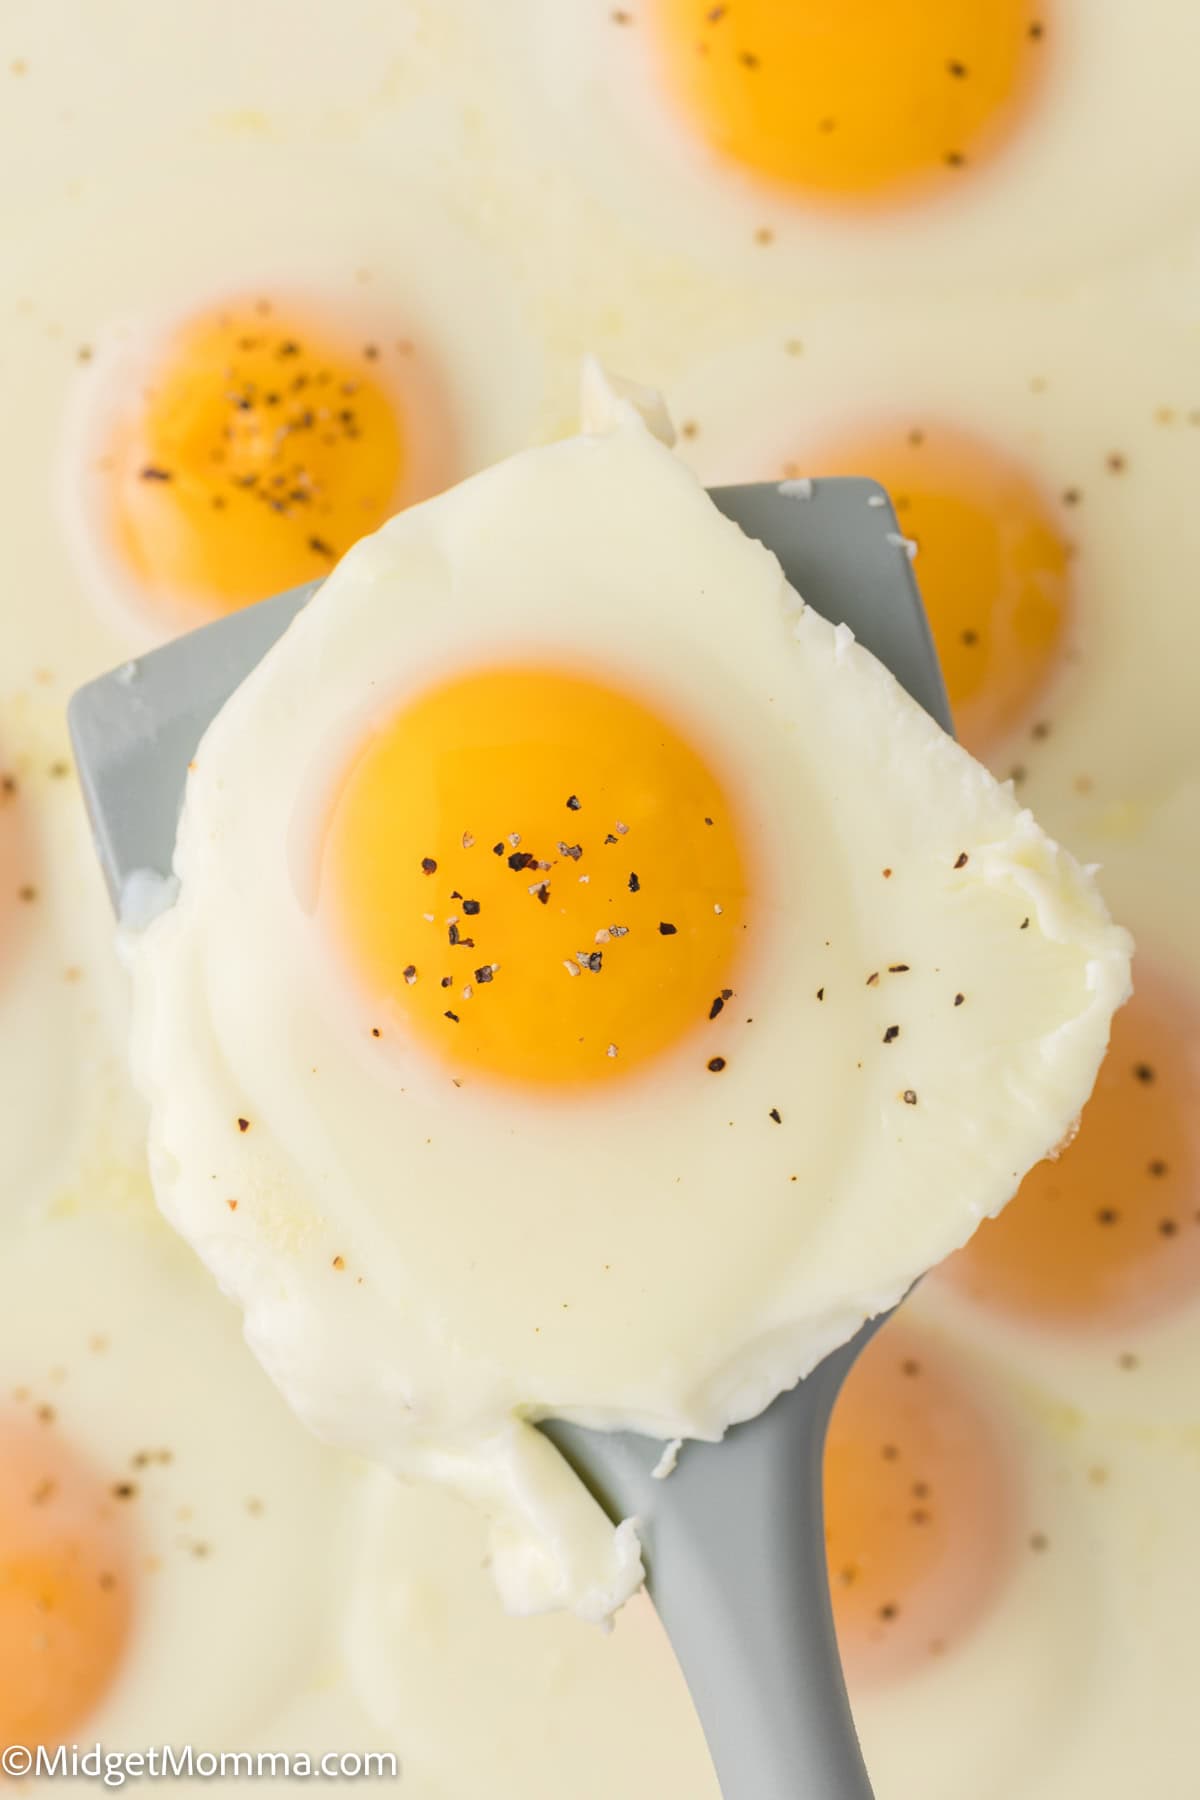 A spatula holding a cooked sunny-side-up egg with pepper, surrounded by other sunny-side-up eggs in the background.